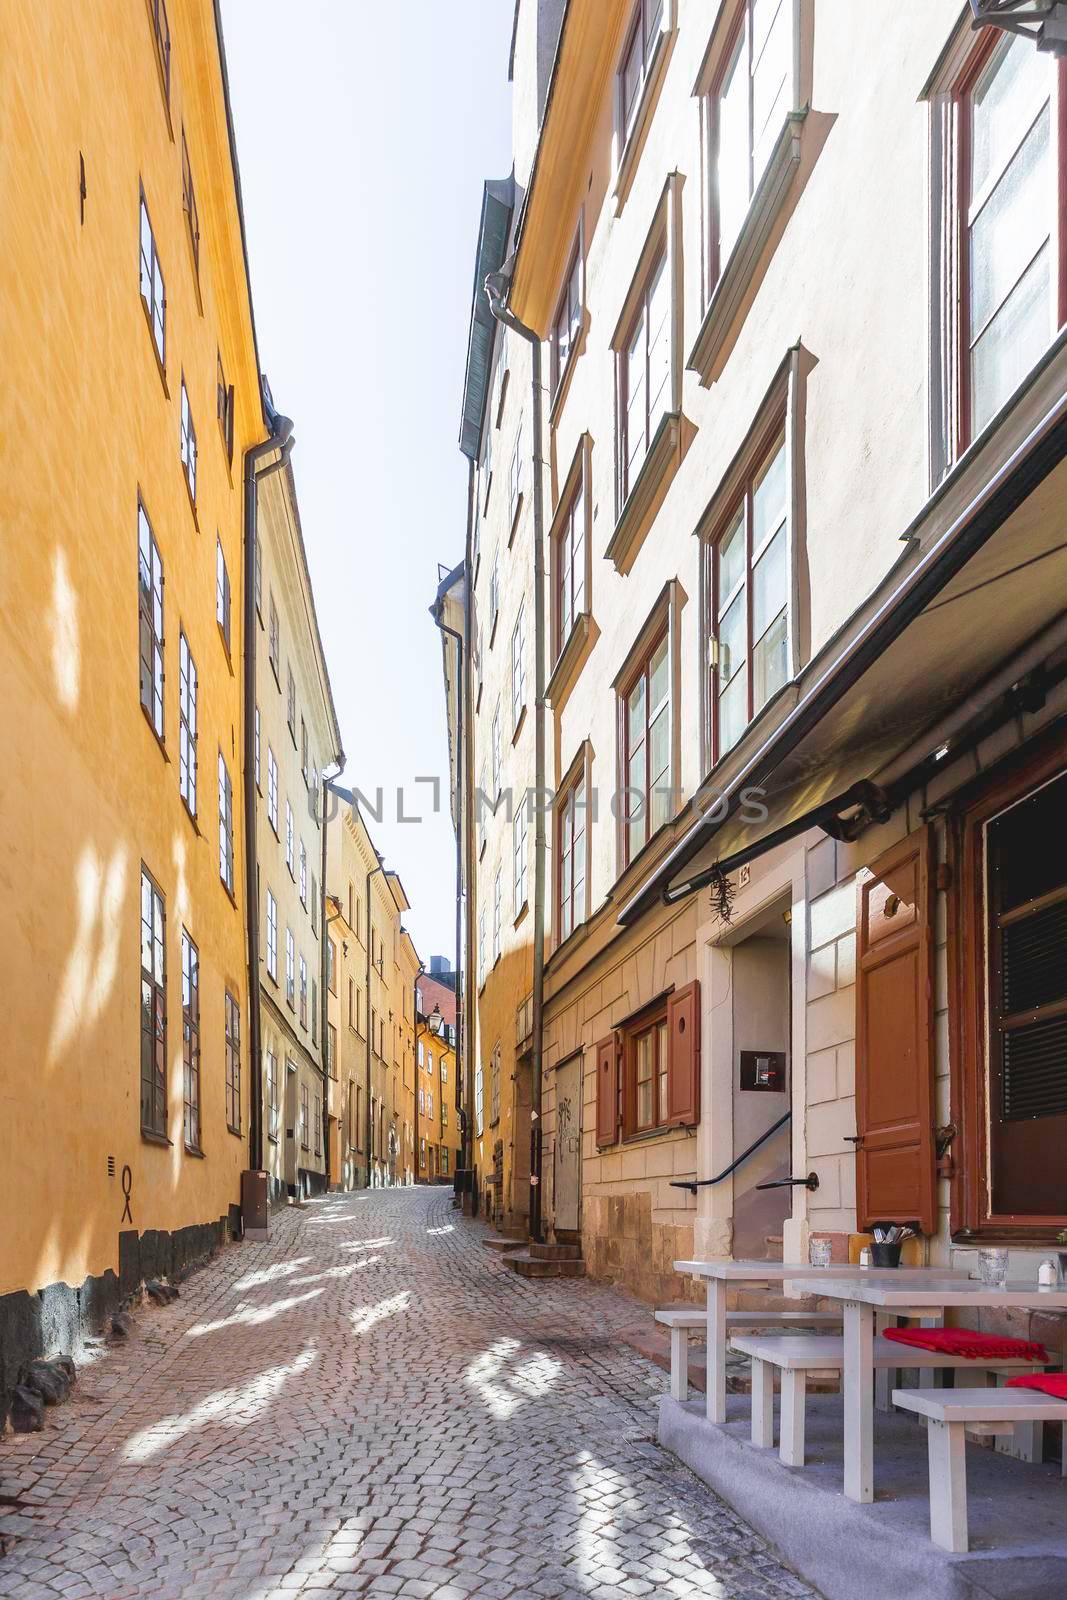 STOCKHOLM, SWEDEN - July 06, 2017. Bright sun reflections on narrow street in historic part of Stockholm. Old fashioned building in Gamla stan, old part of town.